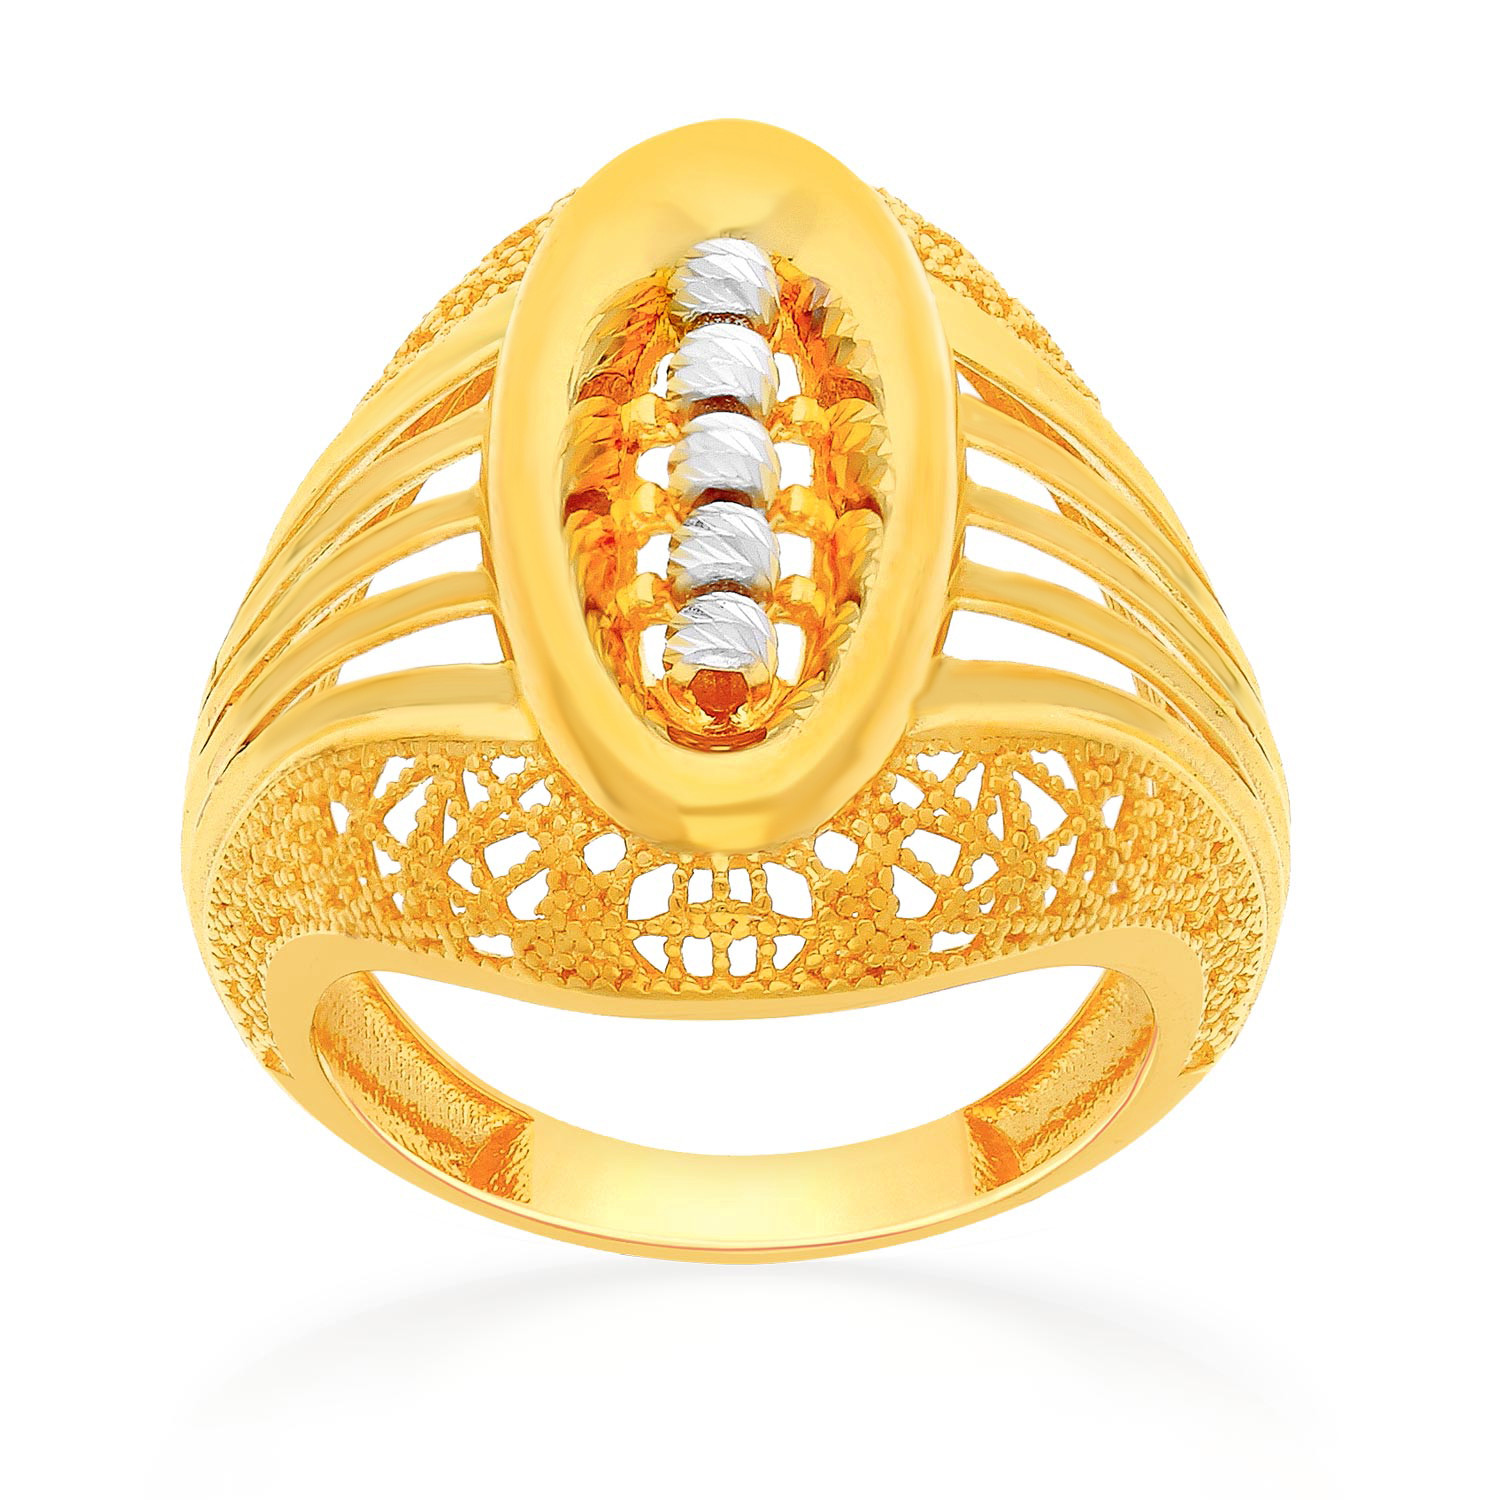 Buy Malabar Gold and Diamonds 22k Gold Ring Online At Best Price @ Tata CLiQ